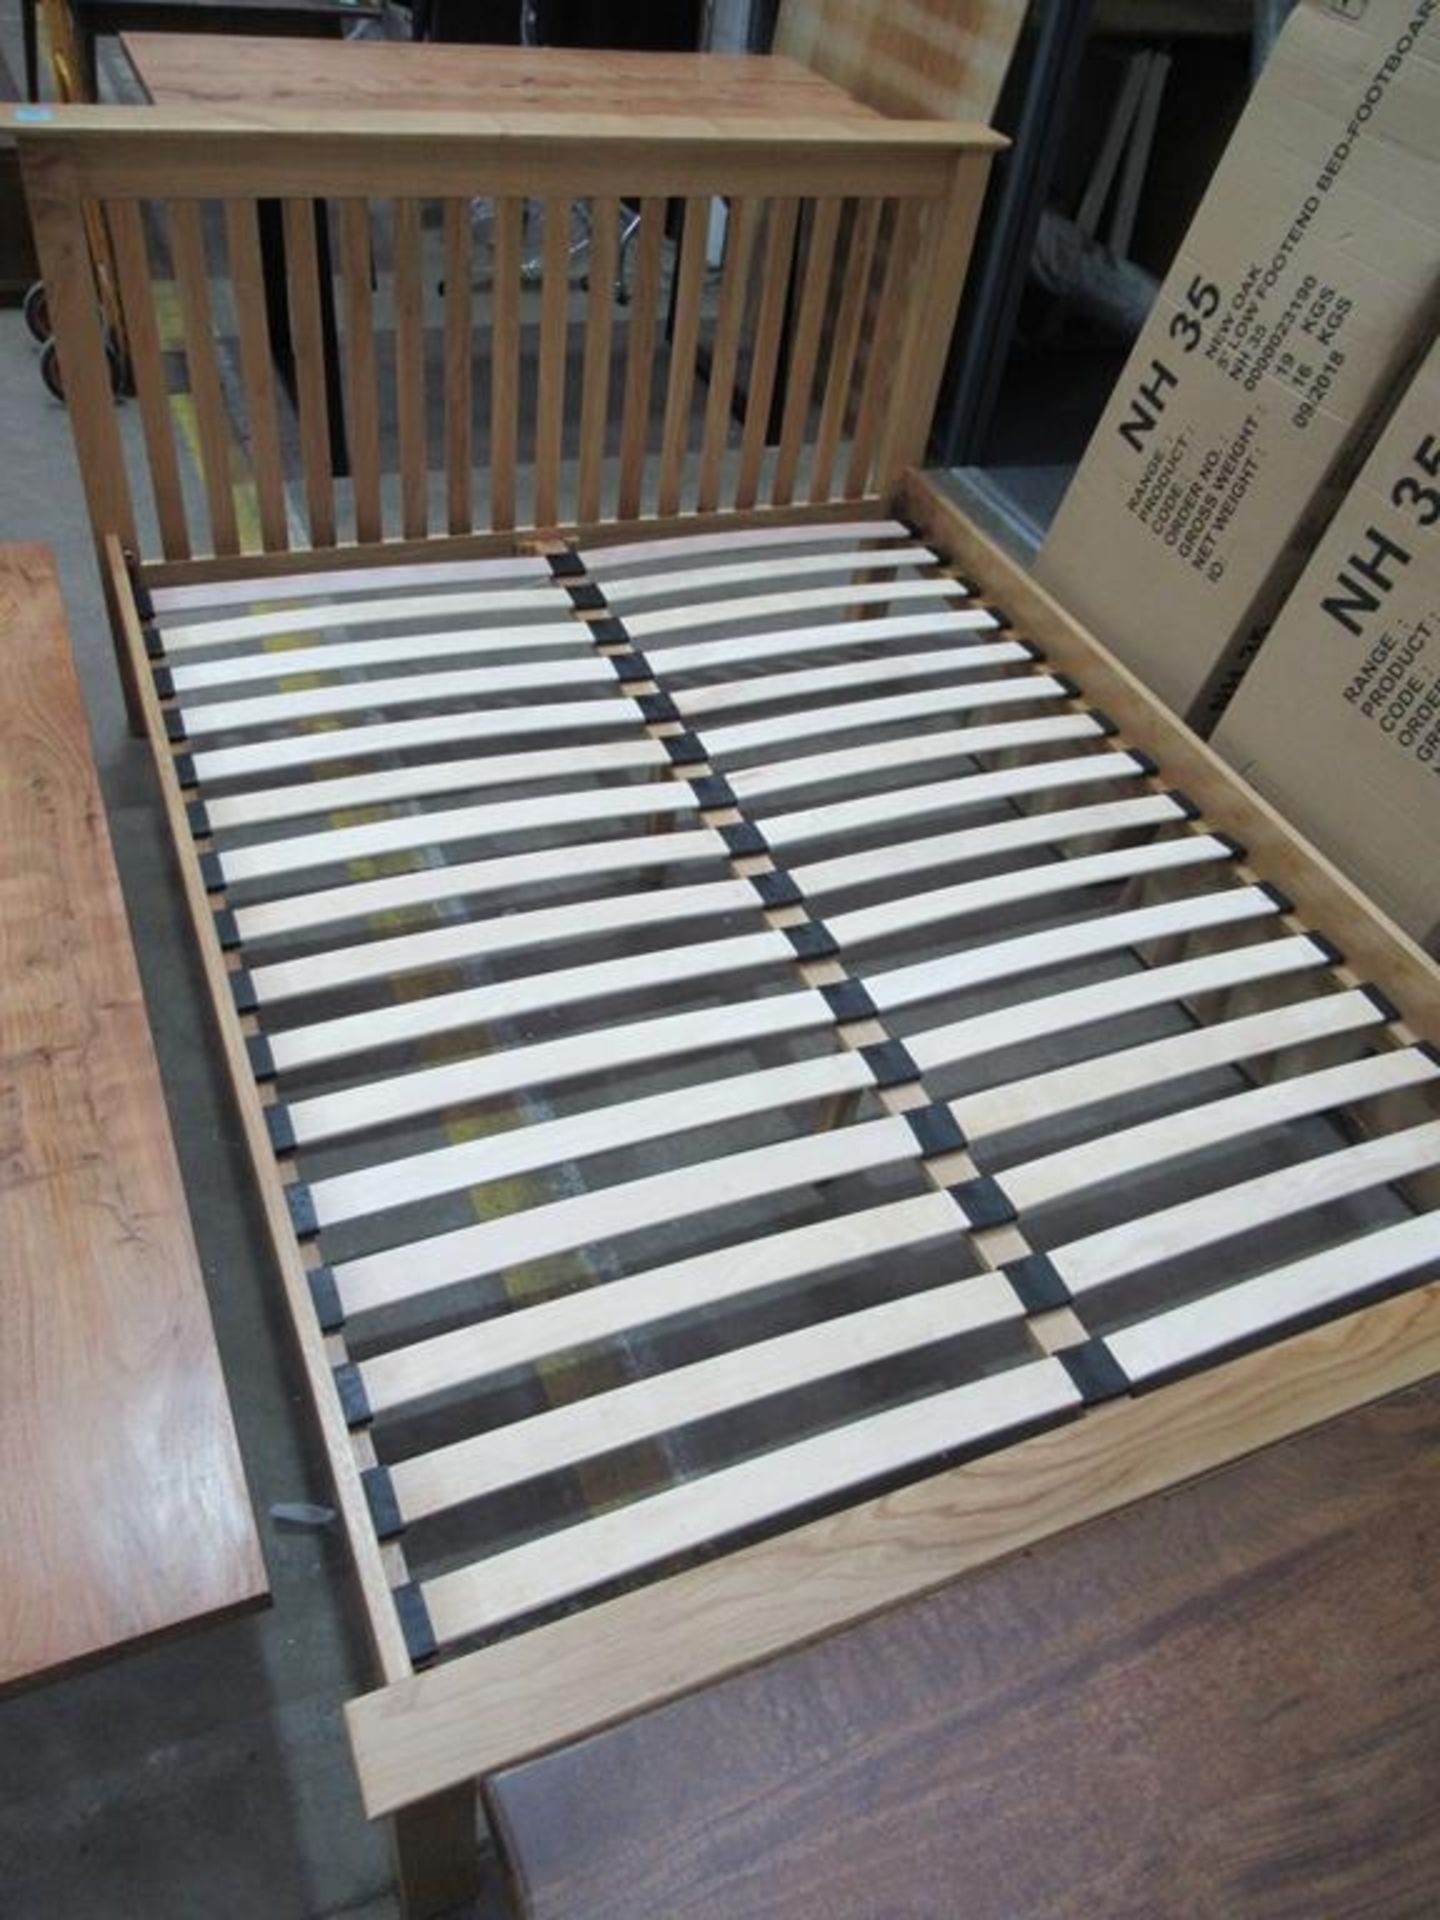 Oak Bed (3 packages per unit) (NH35) - Image 2 of 3